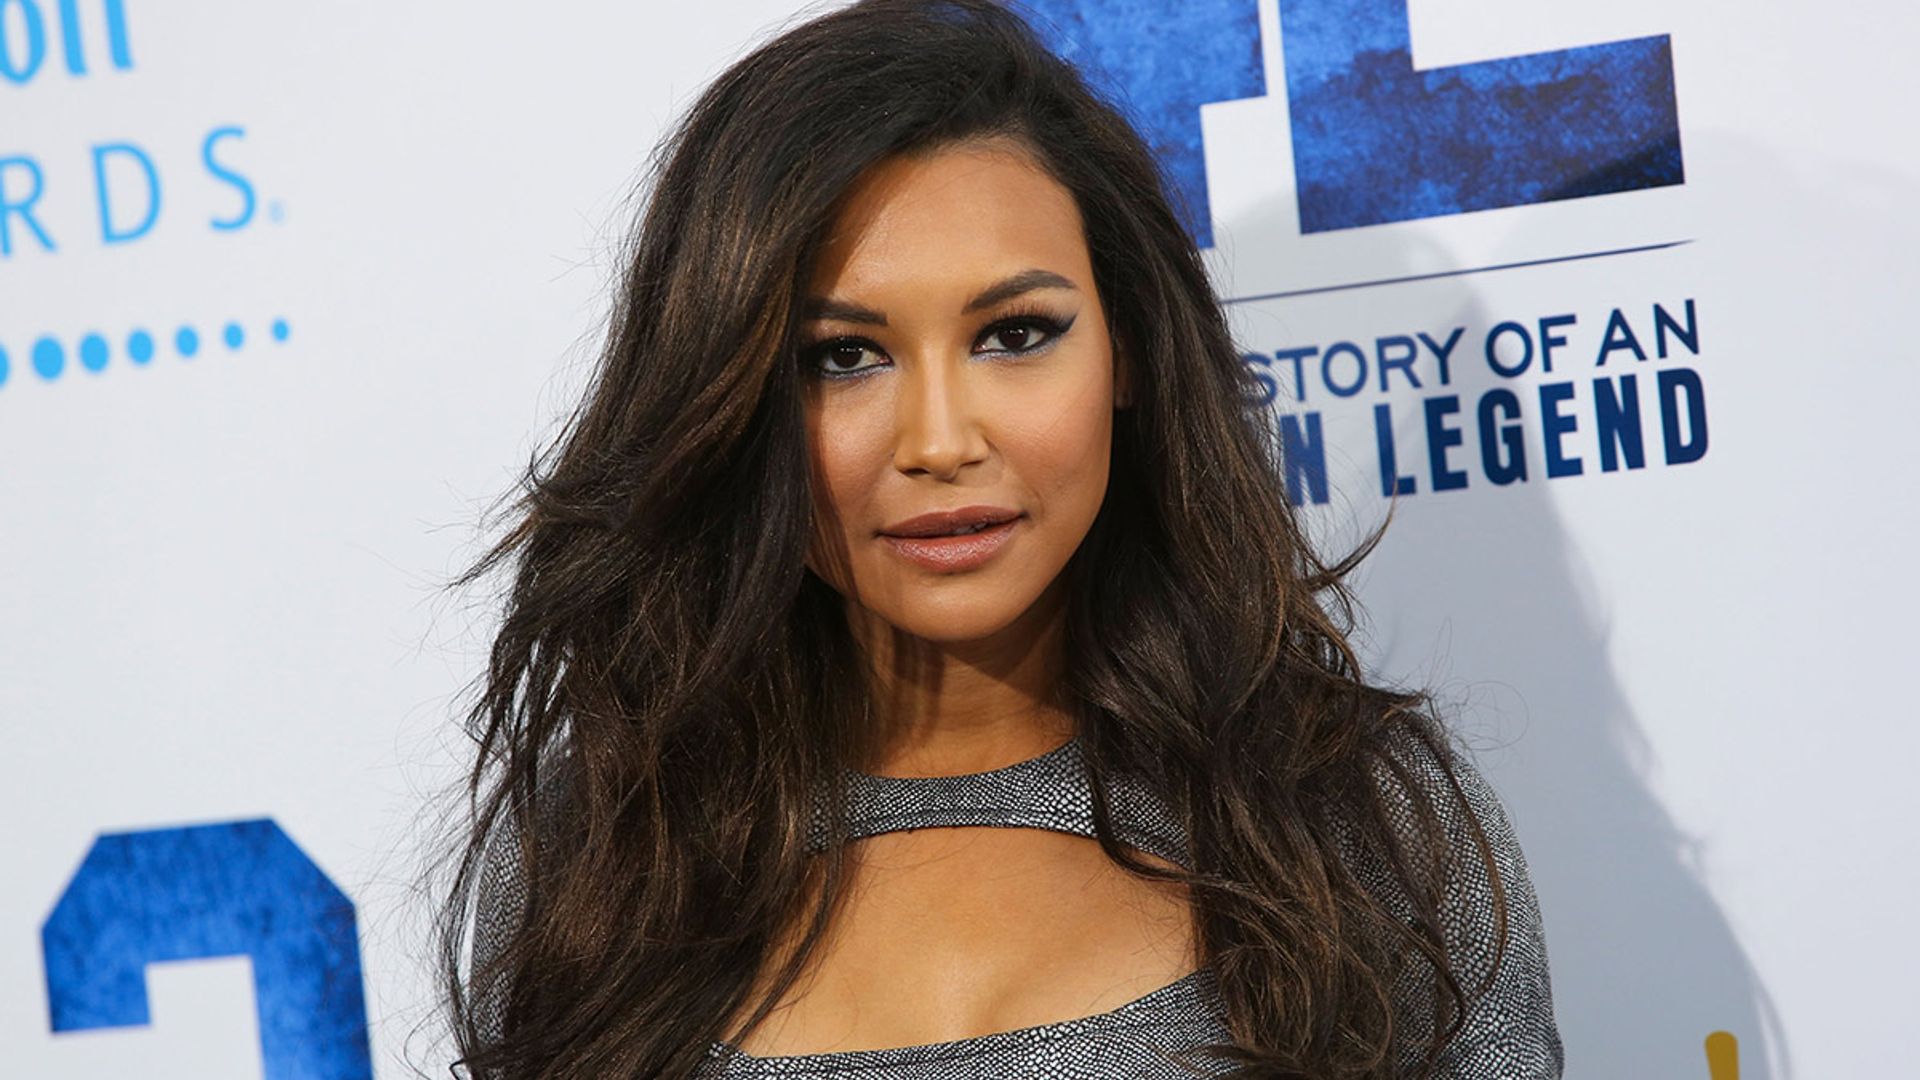 Naya Rivera's posthumous role in Catwoman revealed in new trailer